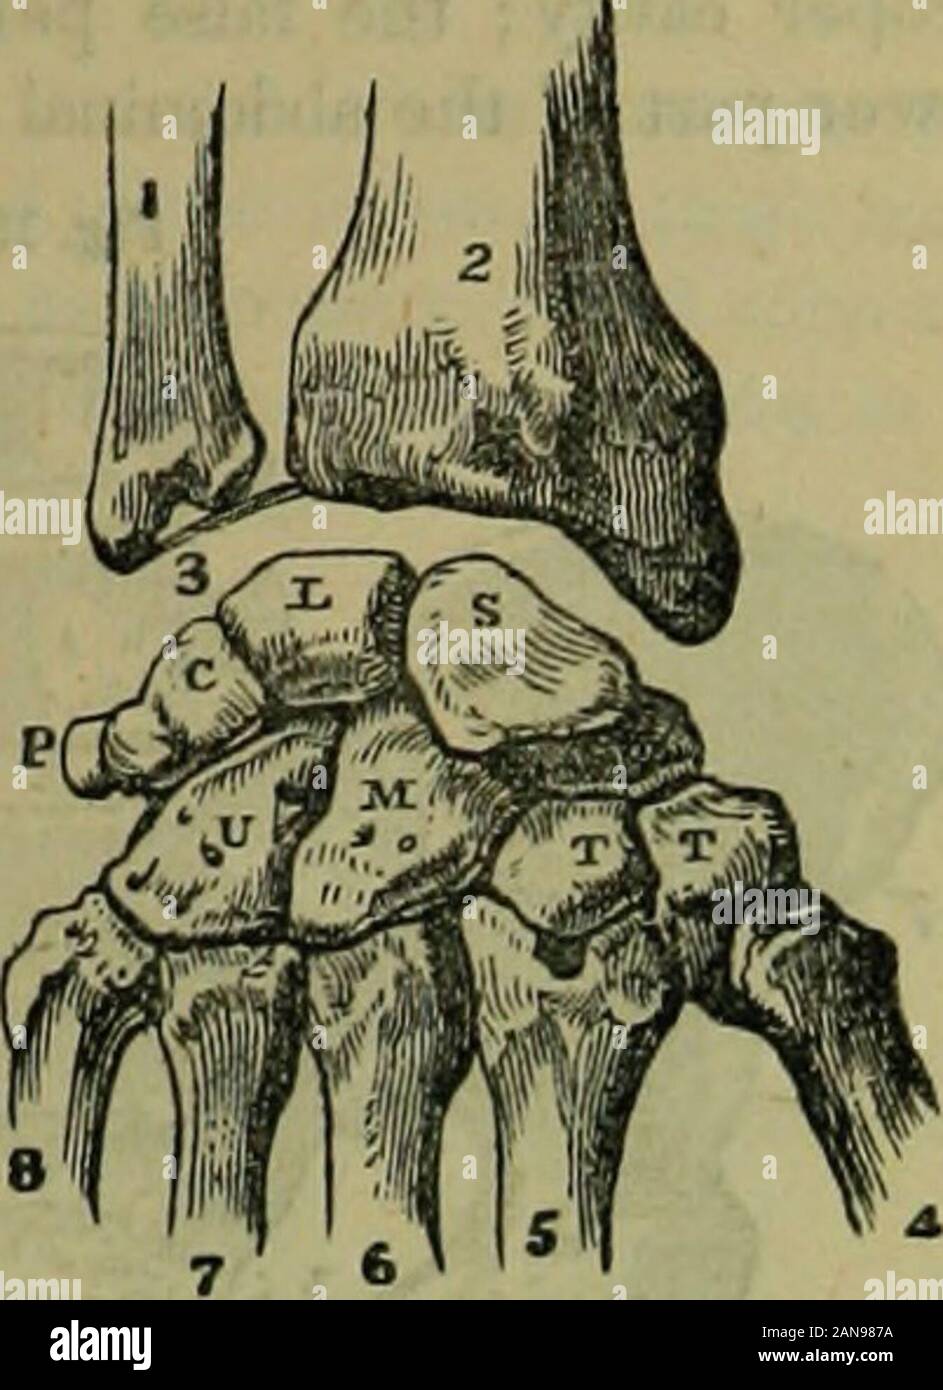 The hydropathic encyclopedia: a system of hydropathy and hygiene .. . loid process of the ulDa, and to the marginof the articular surface of the radius. S Thescaphoid. L. Semilunar. C. Cuneiform. P. Pi-siform. T. Trapezium. T. Trapezoides. M. Osmagnum. U. Unciforca. BONES OF THE HAND. These are divisible into the meta-carpus and phalanges. The metacarpusis composed of the five long bones be-tween the fingers and wrist; that per-taining to the thumb is one third shorterthan the others. The phalanges arethe finger bones; they are fourteen innumber, three belonging to each finger,and two oo the t Stock Photo